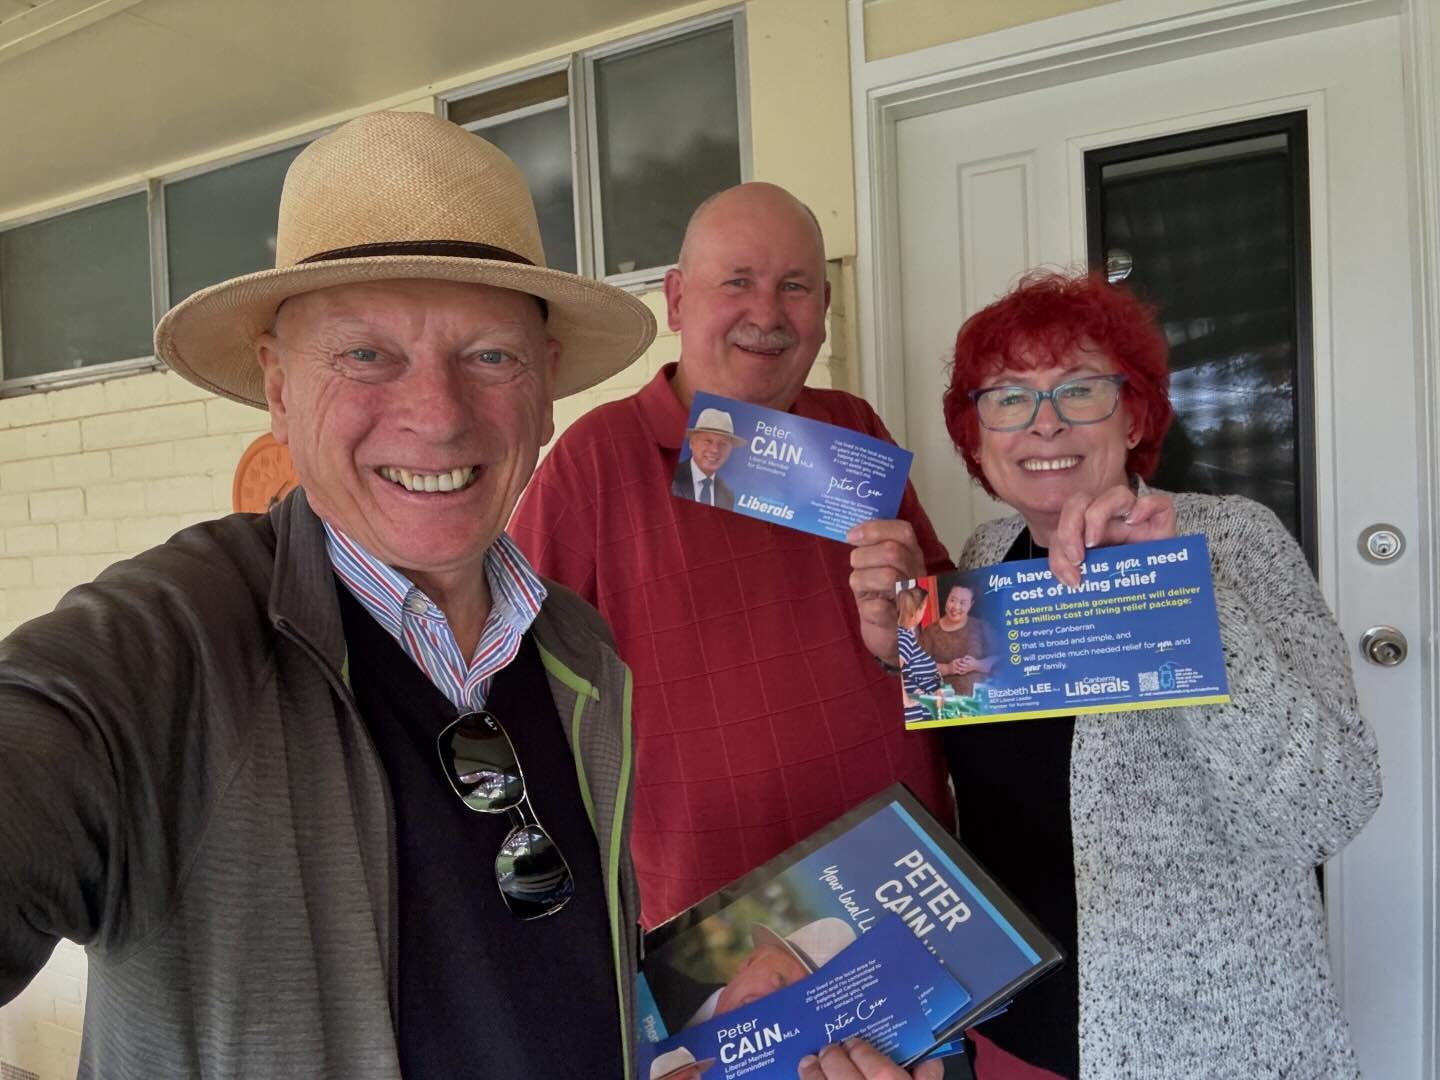 Great to spend much of today doorknocking in the electorate. There is definitely a mood for change👍
@canberraliberals